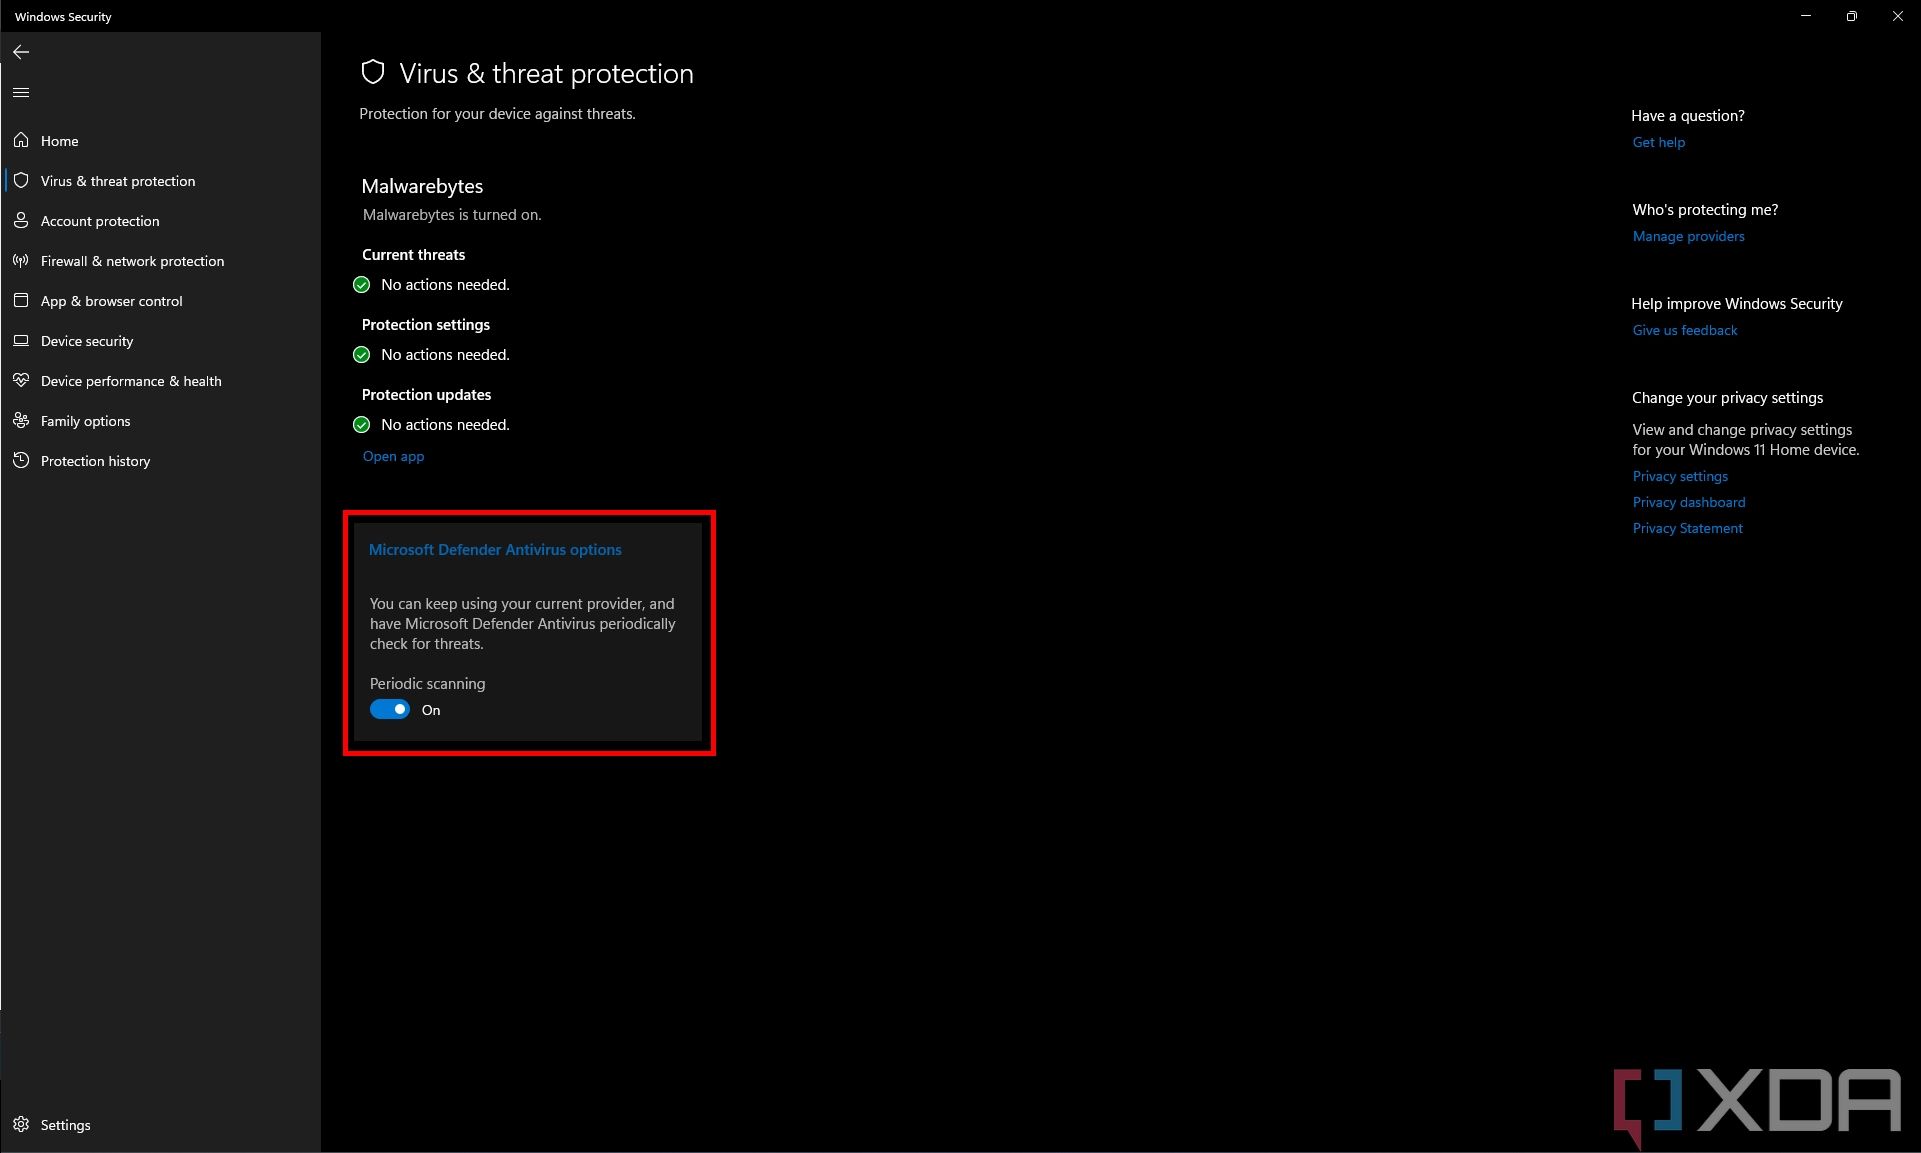 Screenshot of the Microsoft Defender Antivirus & Threat Protection settings when another antivirus is installed, showing that the Run a periodic scan option is enabled.